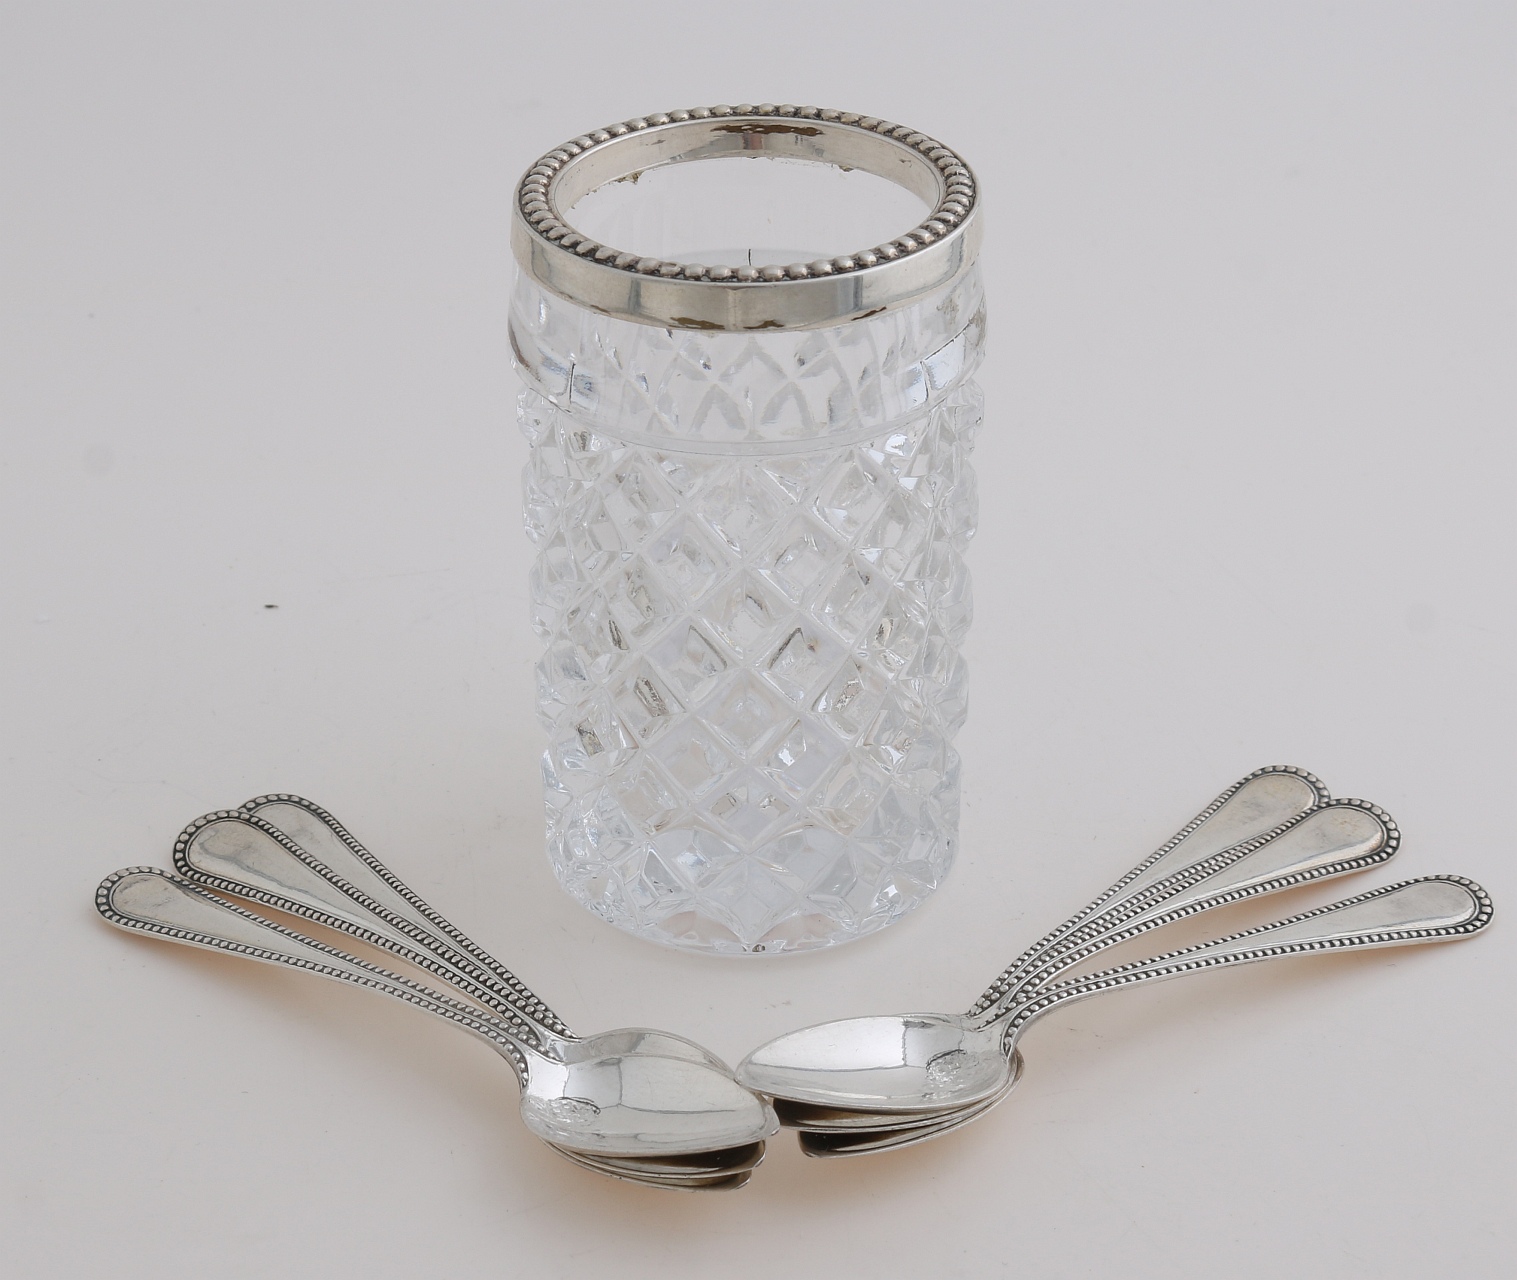 Spoon vase with silver spoons